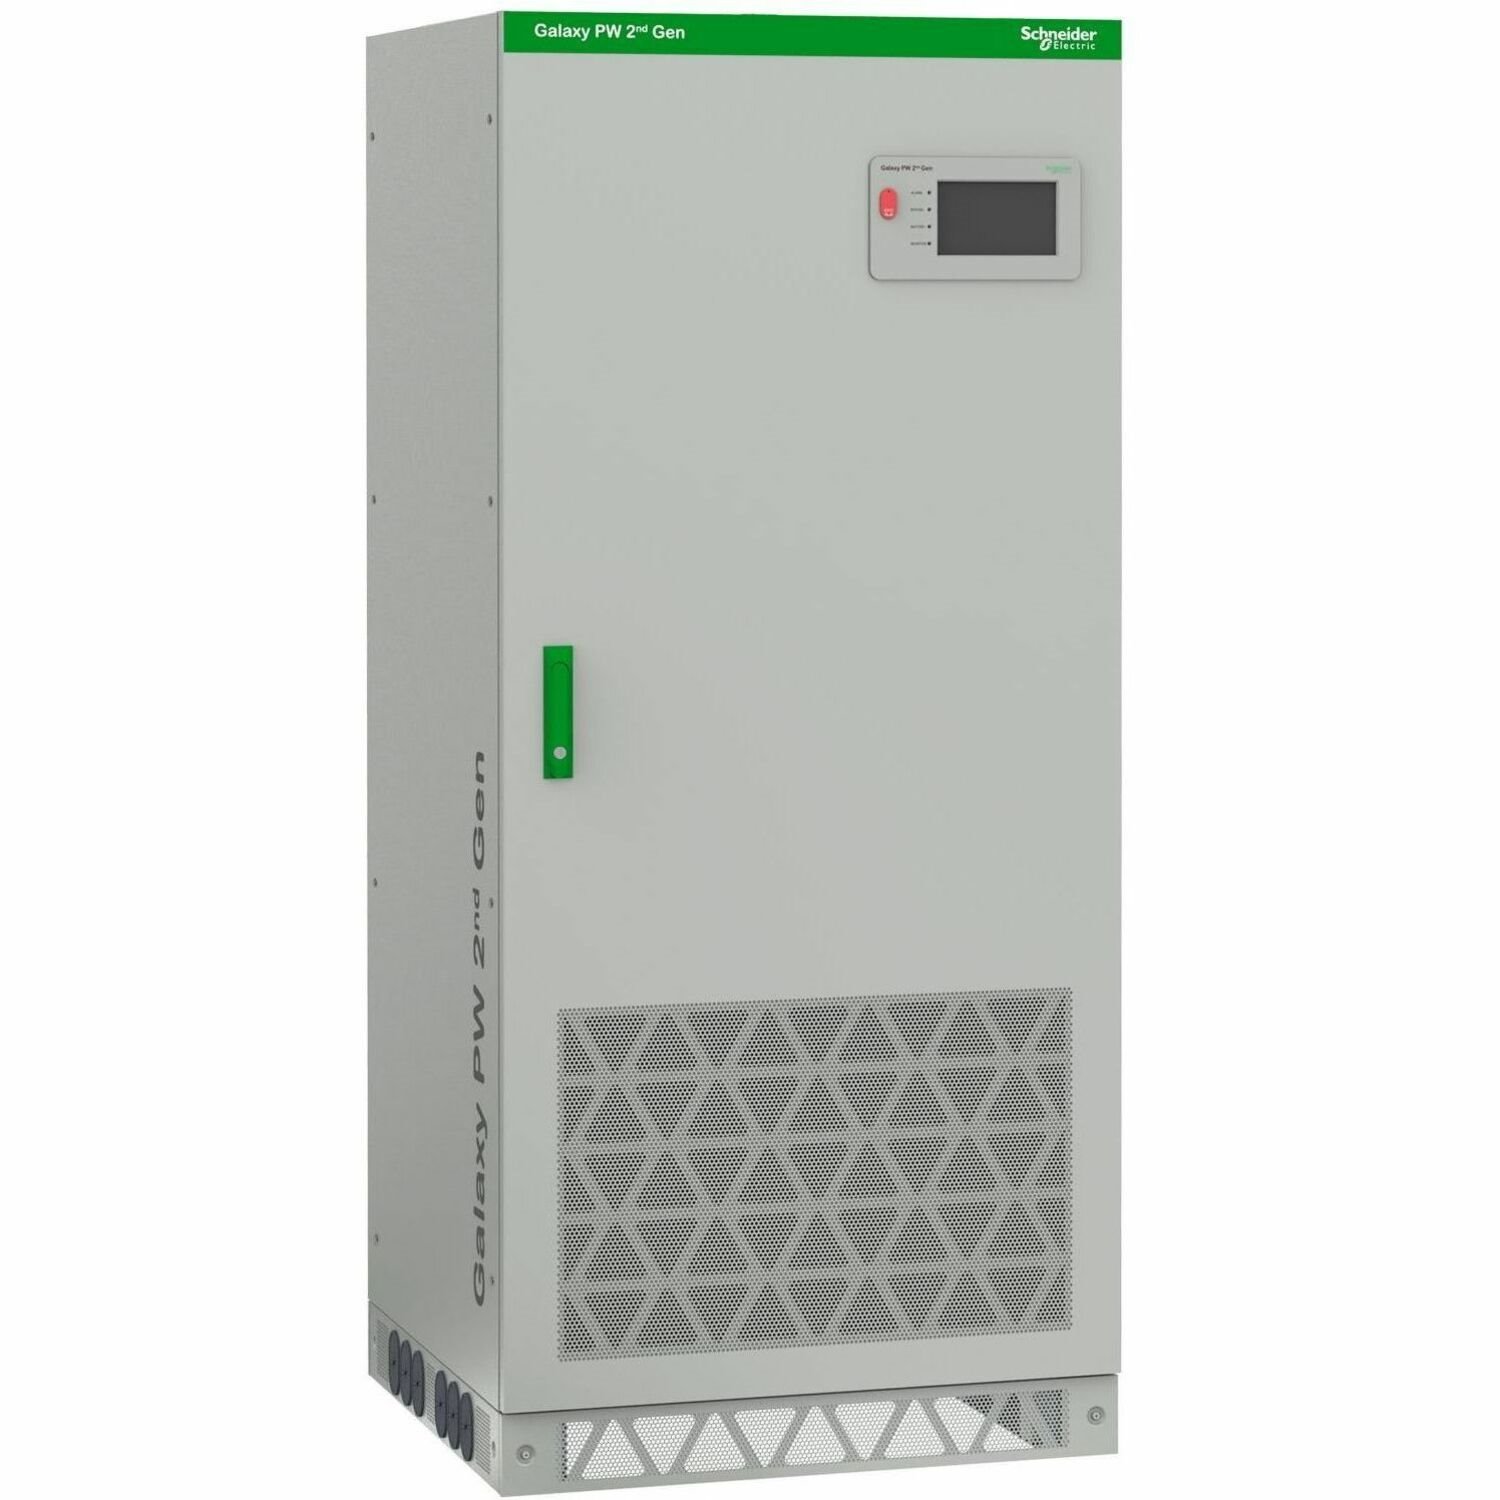 APC by Schneider Electric Galaxy PW 2nd Gen Double Conversion Online UPS - 30 kVA/24 kW - Three Phase